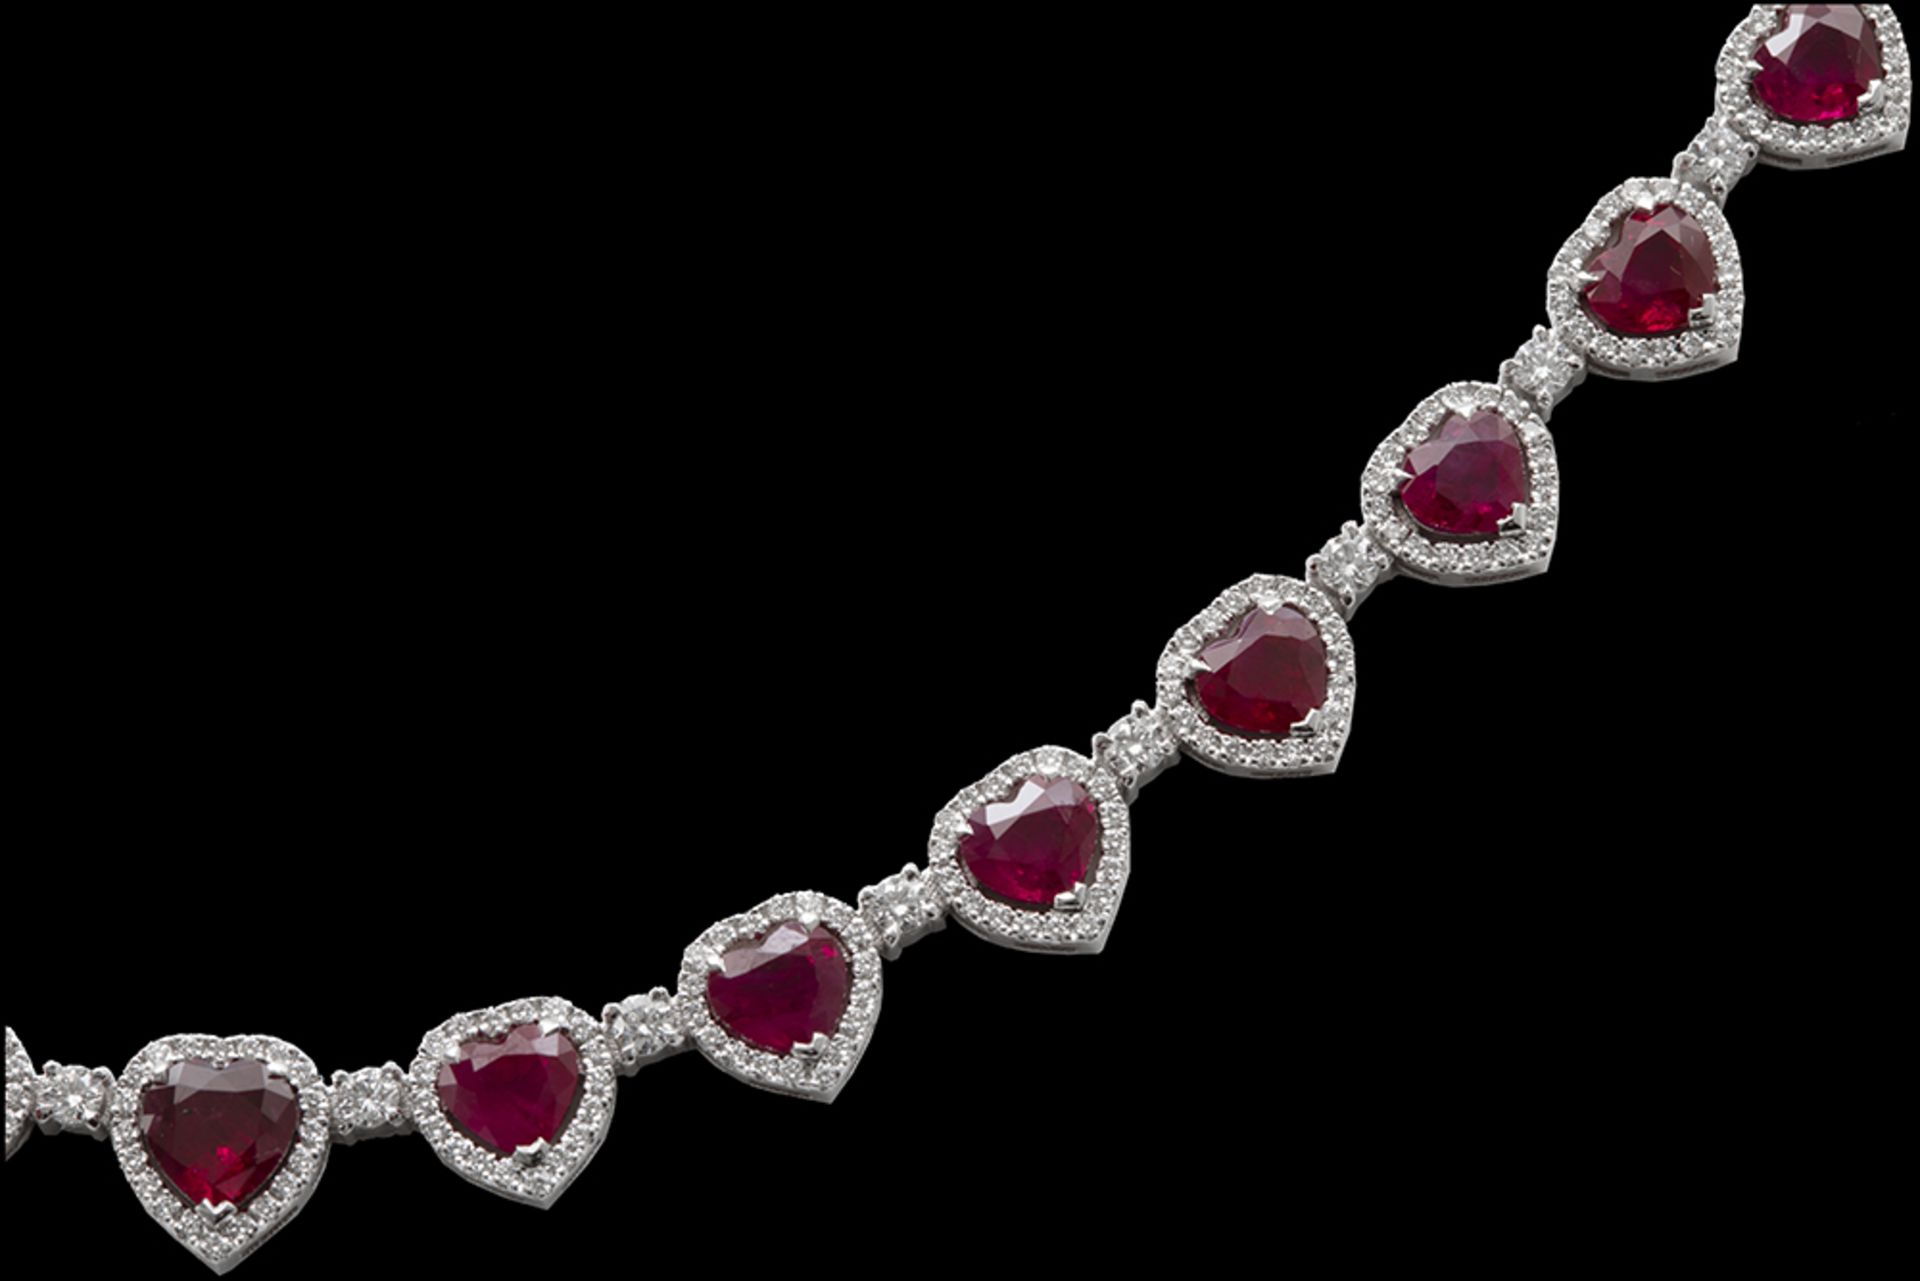 superb necklace in white gold (18 carat) with 18 carat of high quality "pigeon blood" rubies and 6, - Bild 3 aus 4